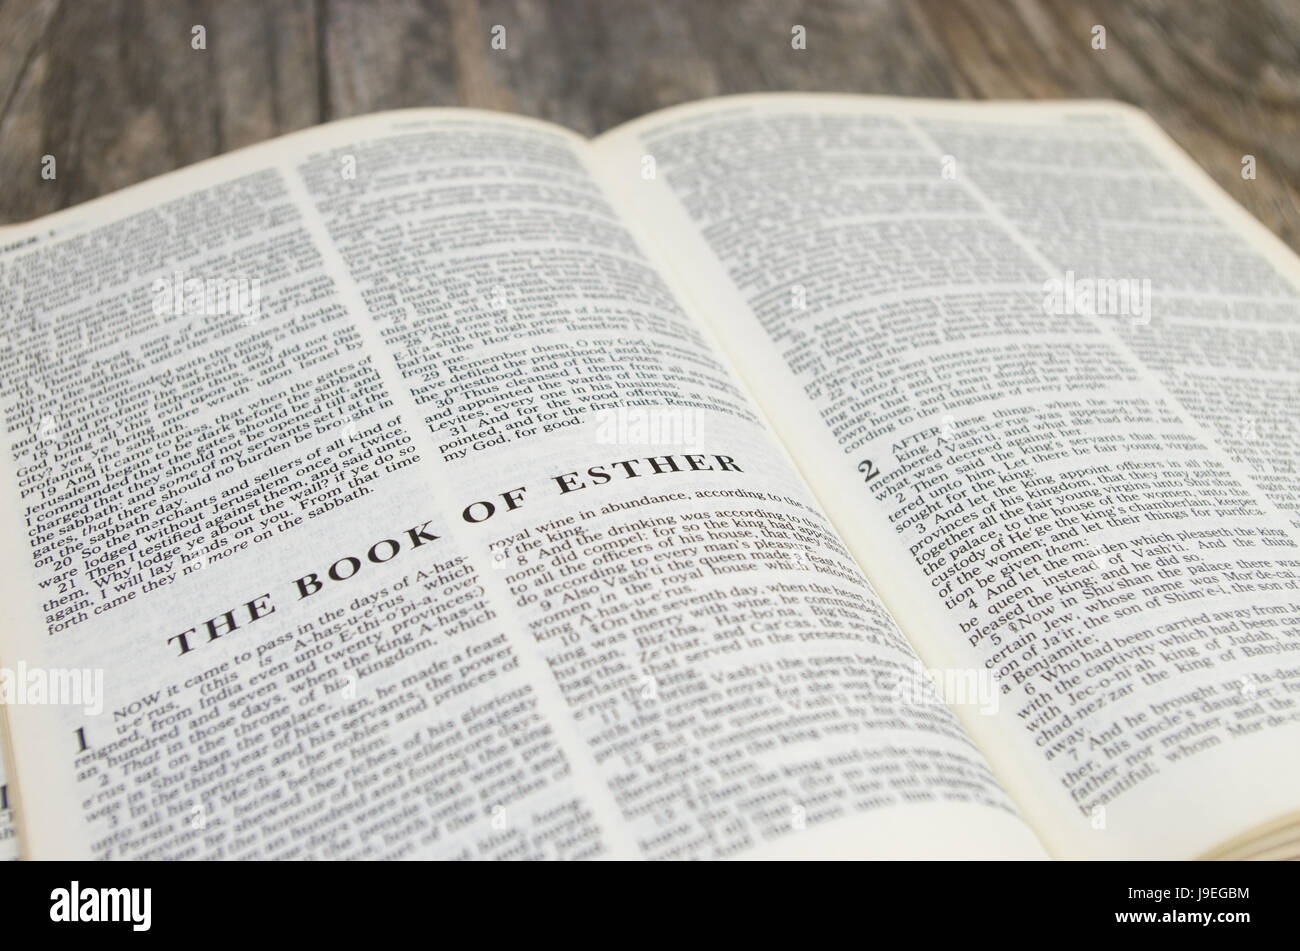 Title page for the book of Esther in the Bible – King James Version Stock Photo